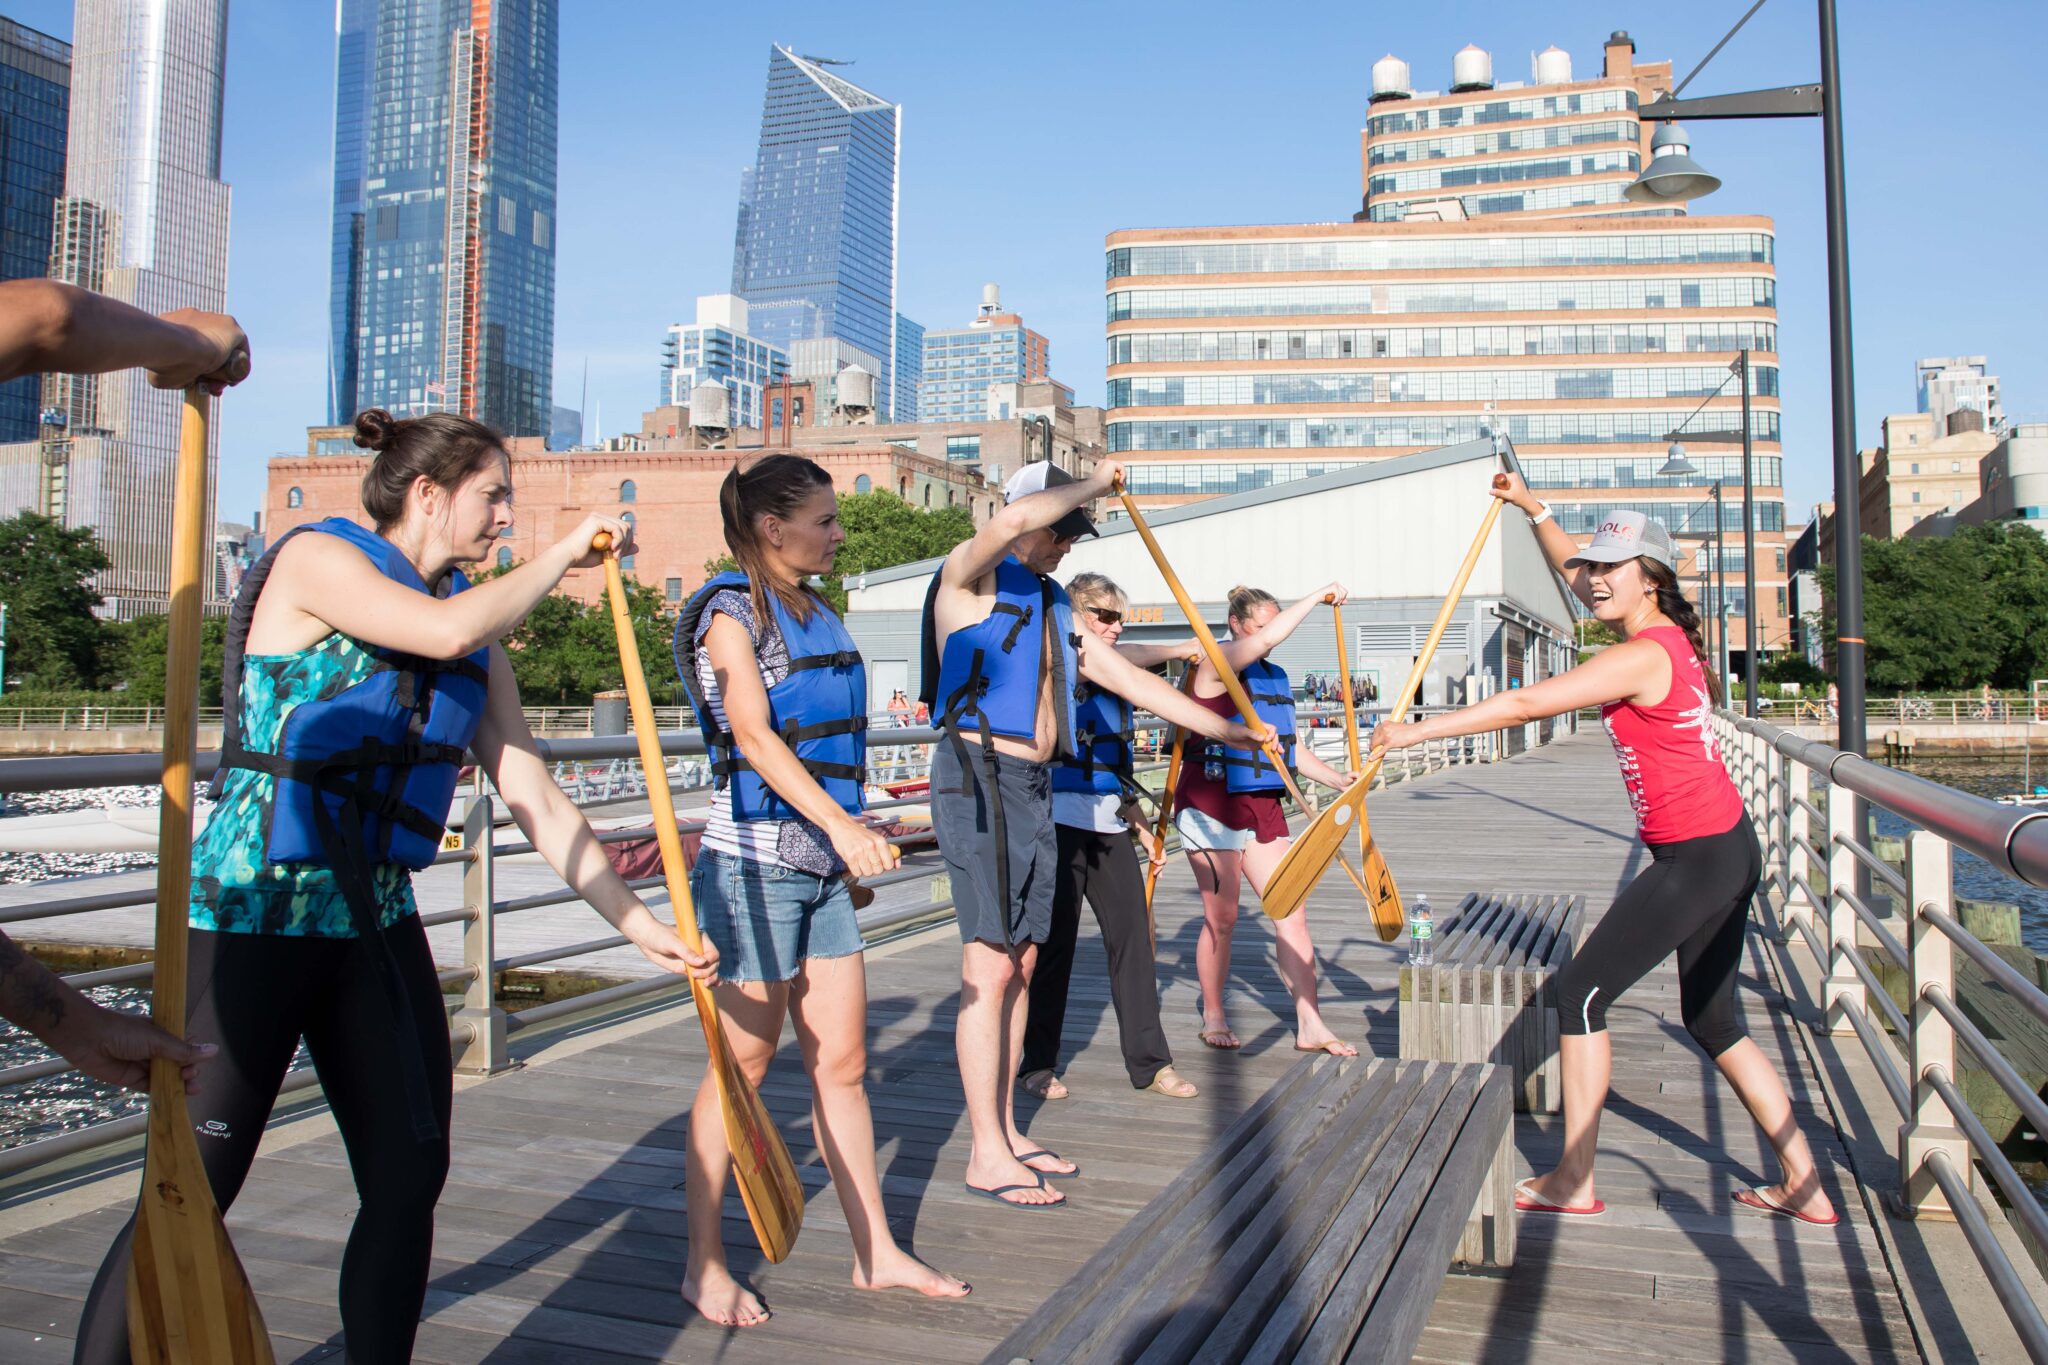 Members of Outrigger take classes on how to paddle their boat on the Hudson River